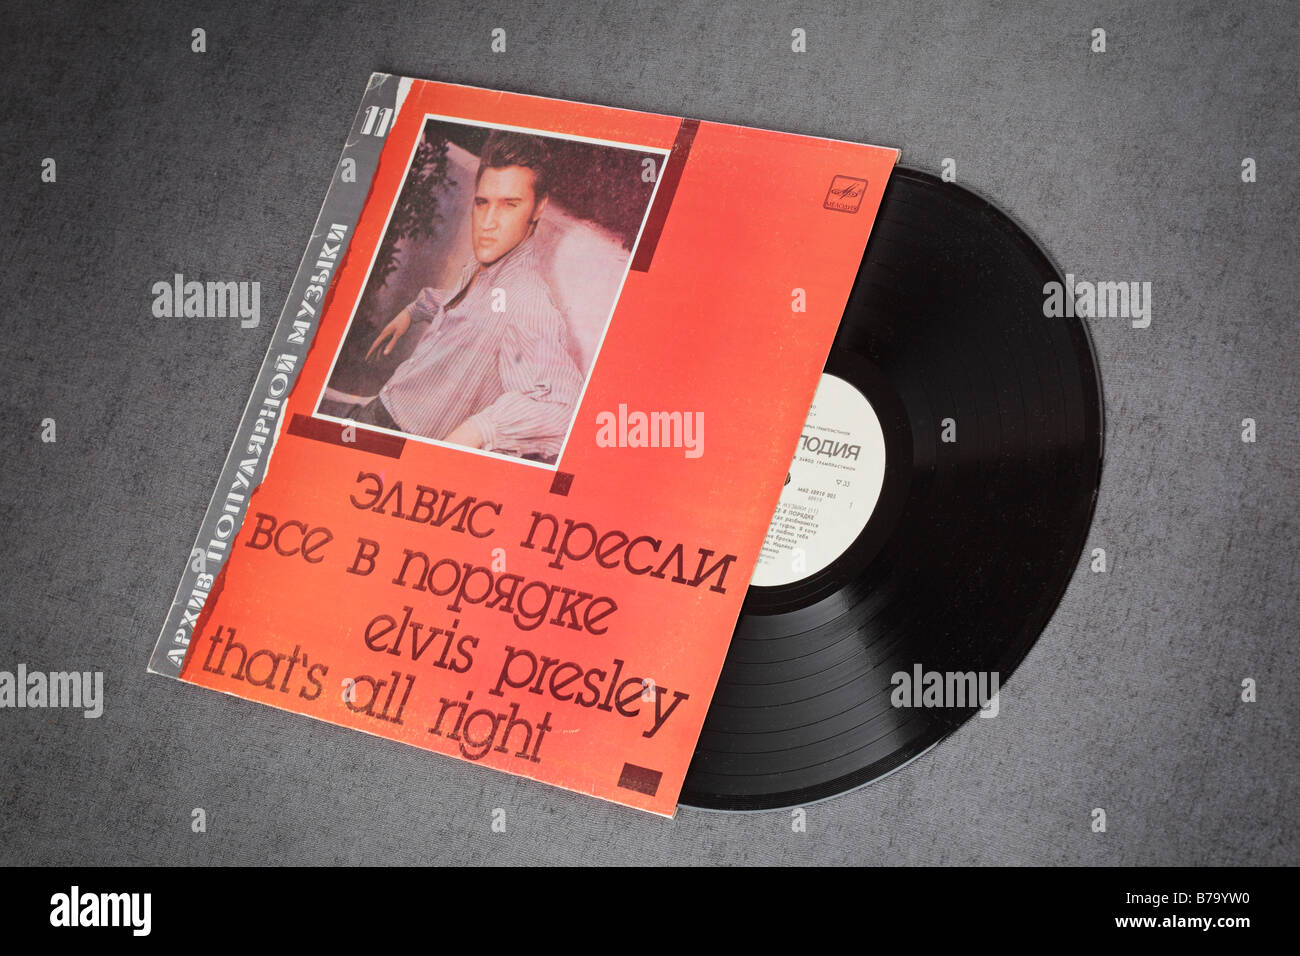 First Elvis Presley LP album published in Soviet Union 1990 Stock Photo